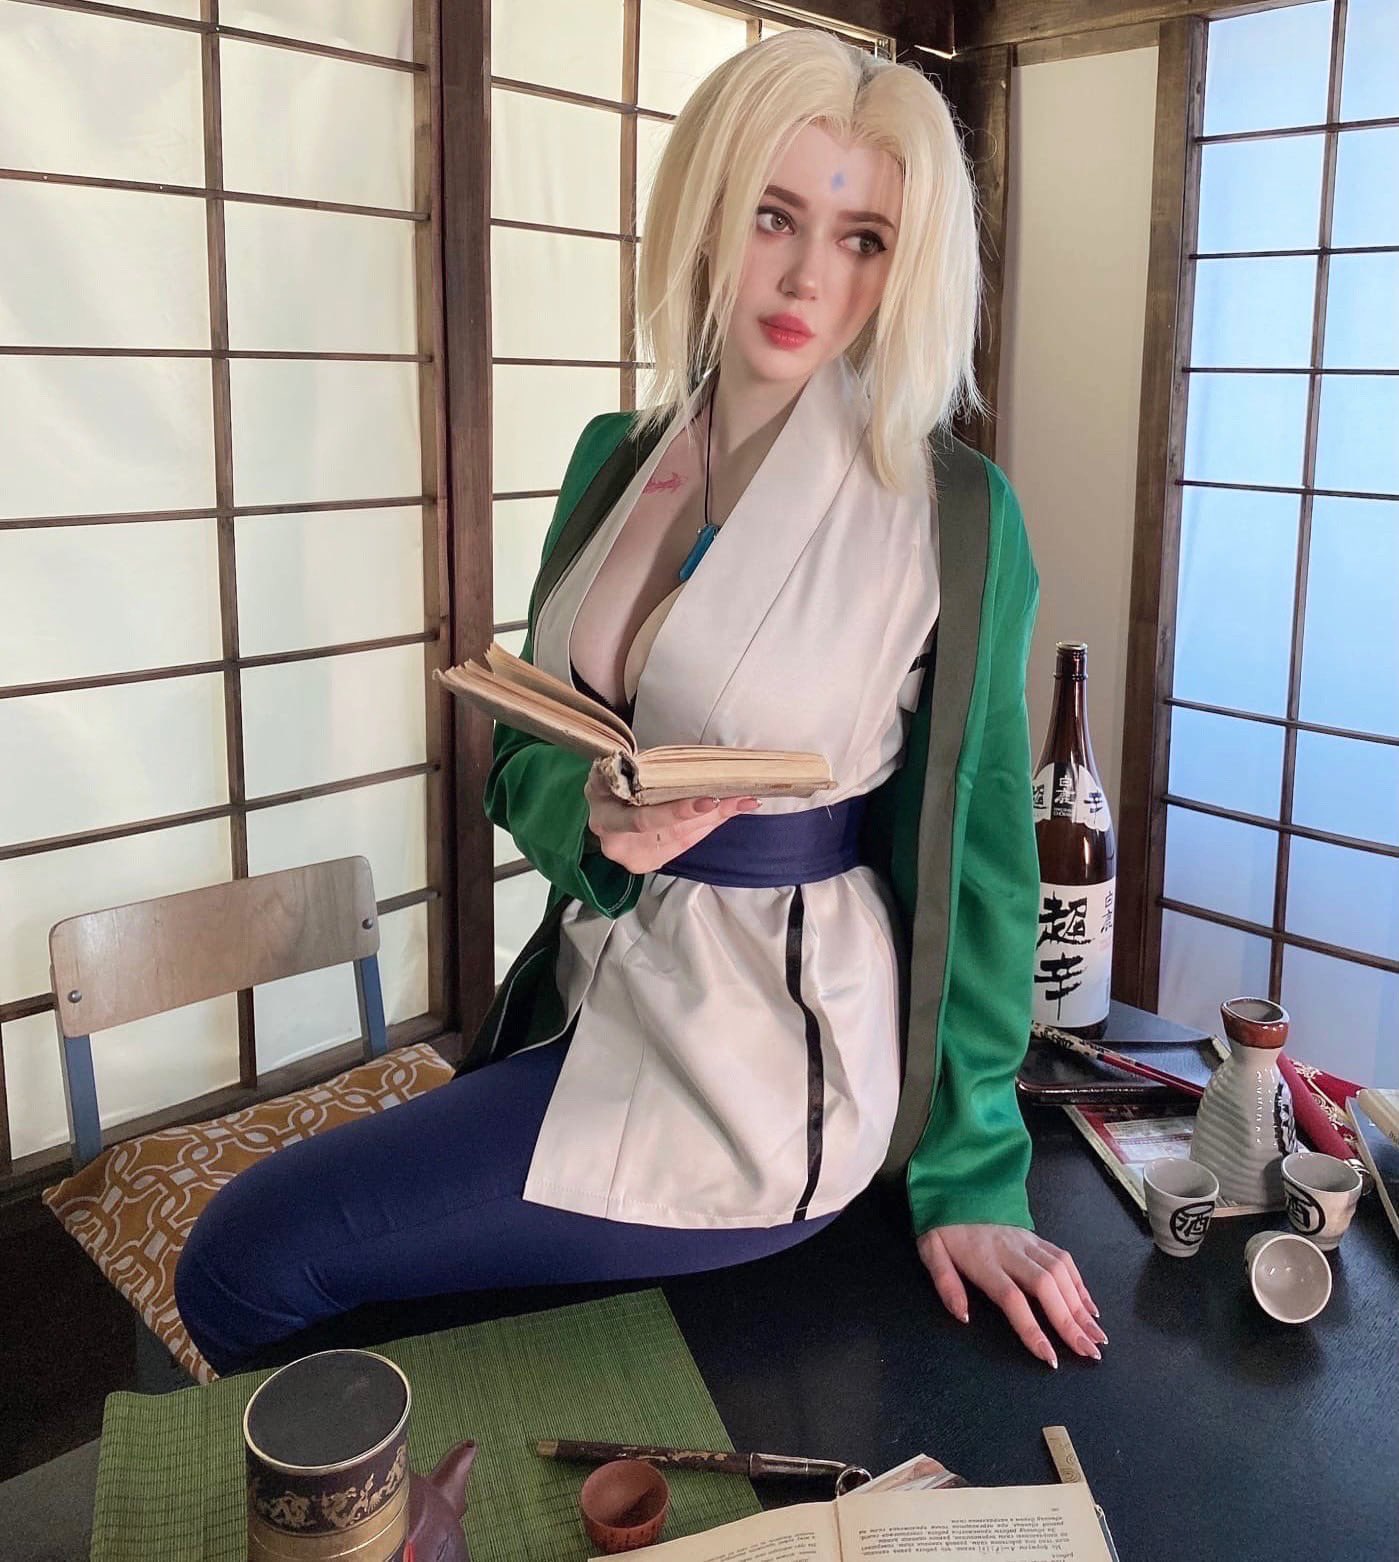 It's getting really hot 🔥 #cosplay #naruto #Tsunade https://t.co/k2H7...